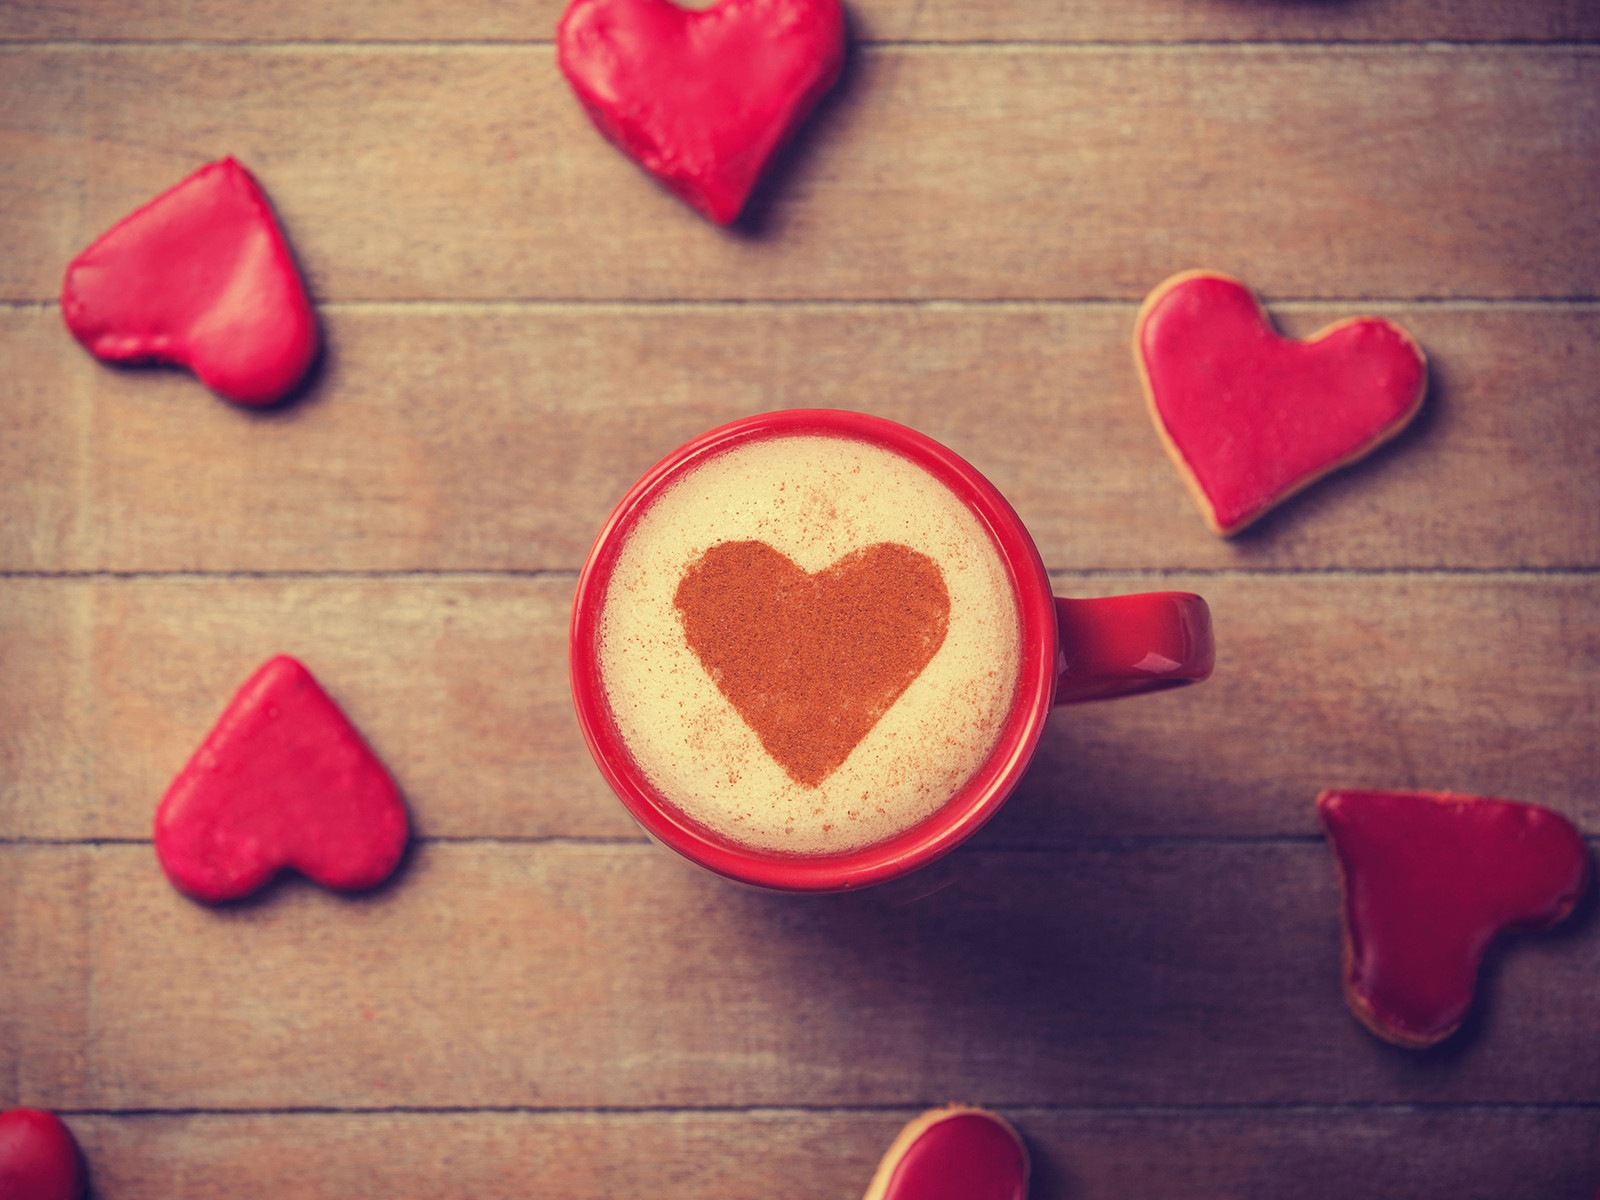 The theme of love, creative heart-shaped HD wallpapers #1 - 1600x1200